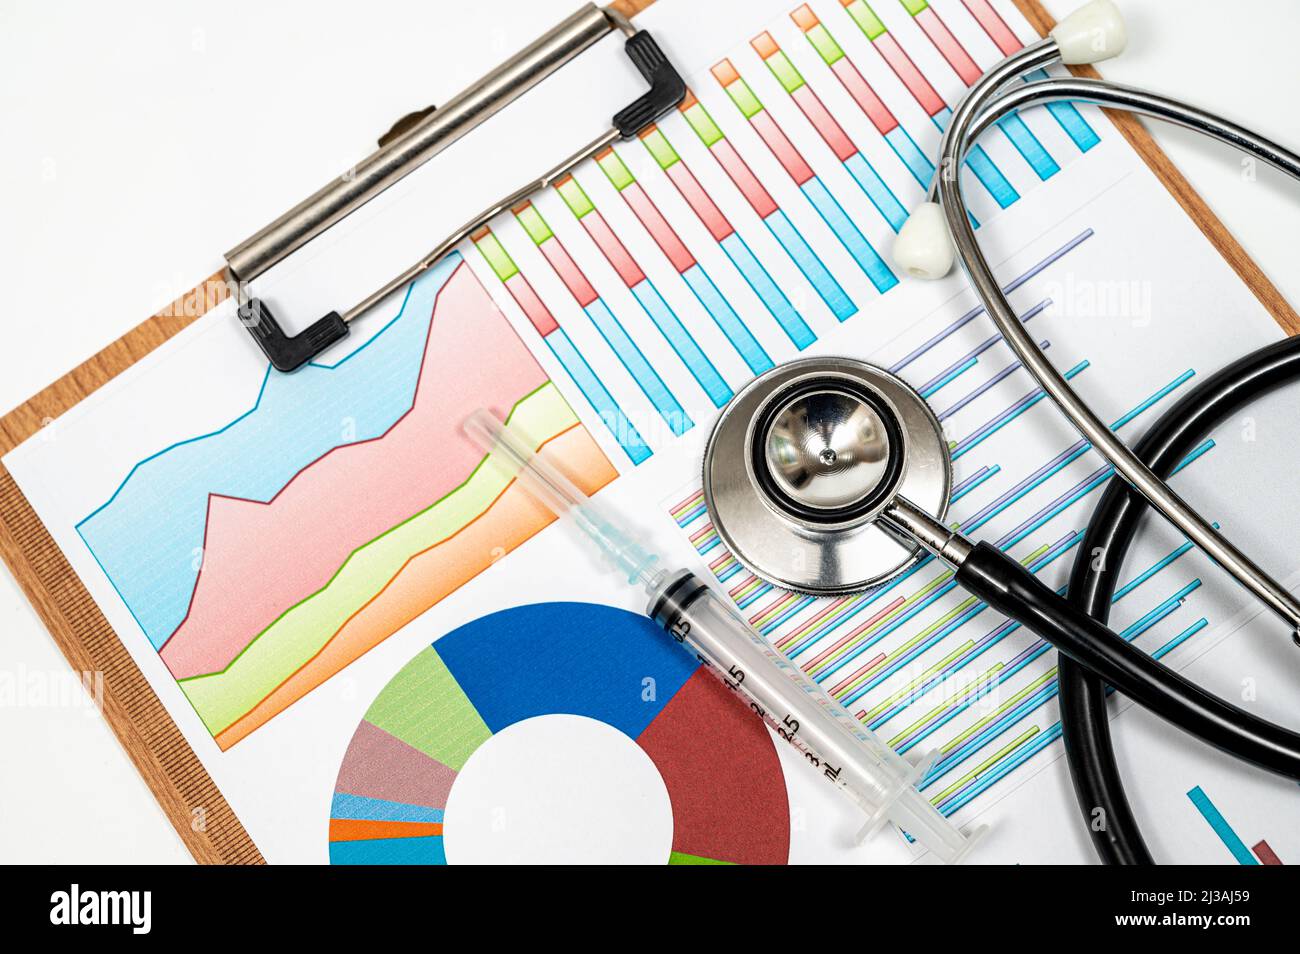 Medical concept background with several types of graphs and a stethoscope. Stock Photo